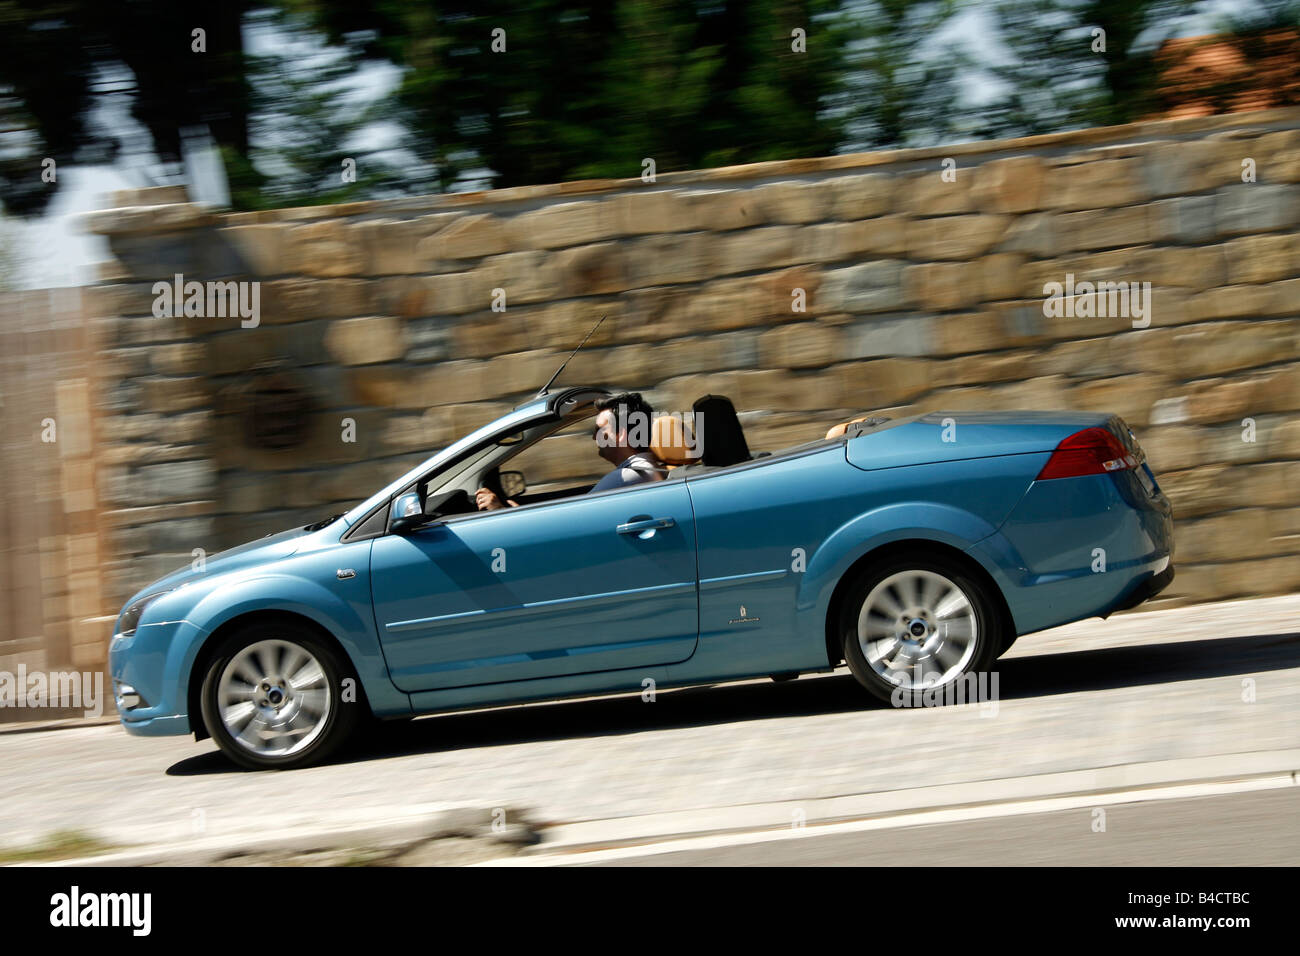 Ford Focus Coupe-Convertible 2.0, model year 2006-, driving, side view, country road, open top Stock Photo